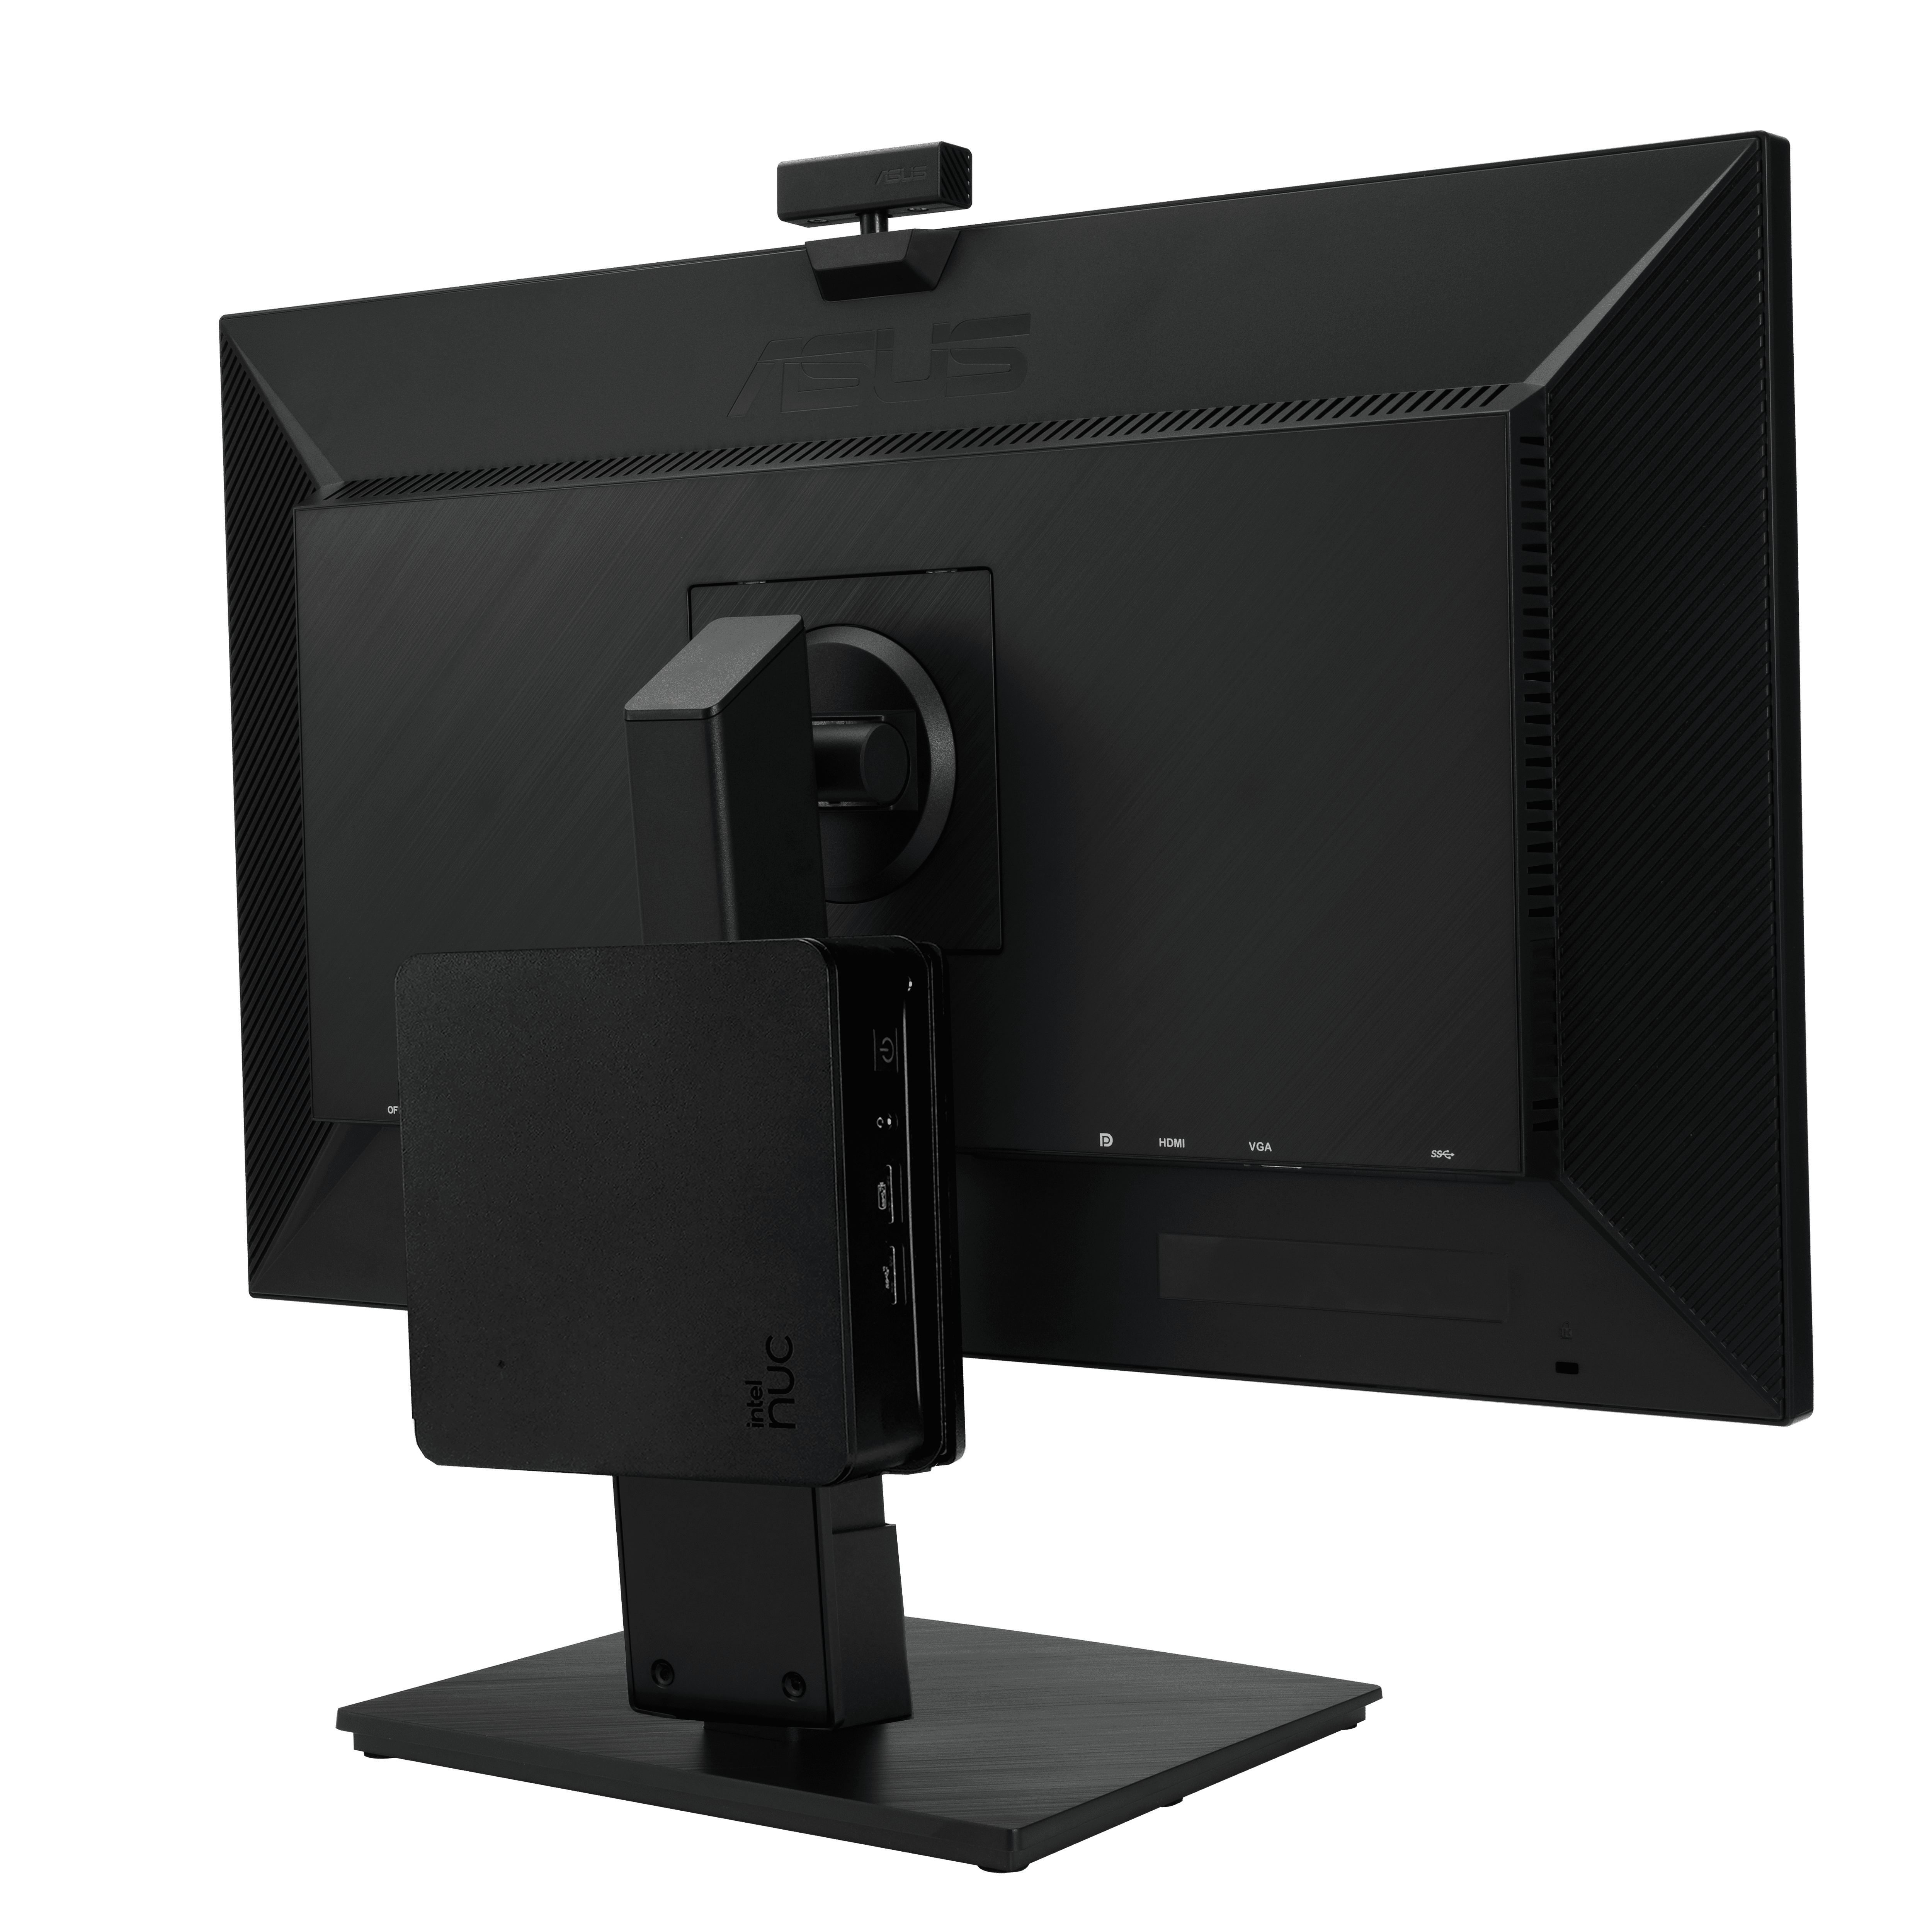 BE279QSK is VESA-mountable, so it's easy to hang it on a wall or post.